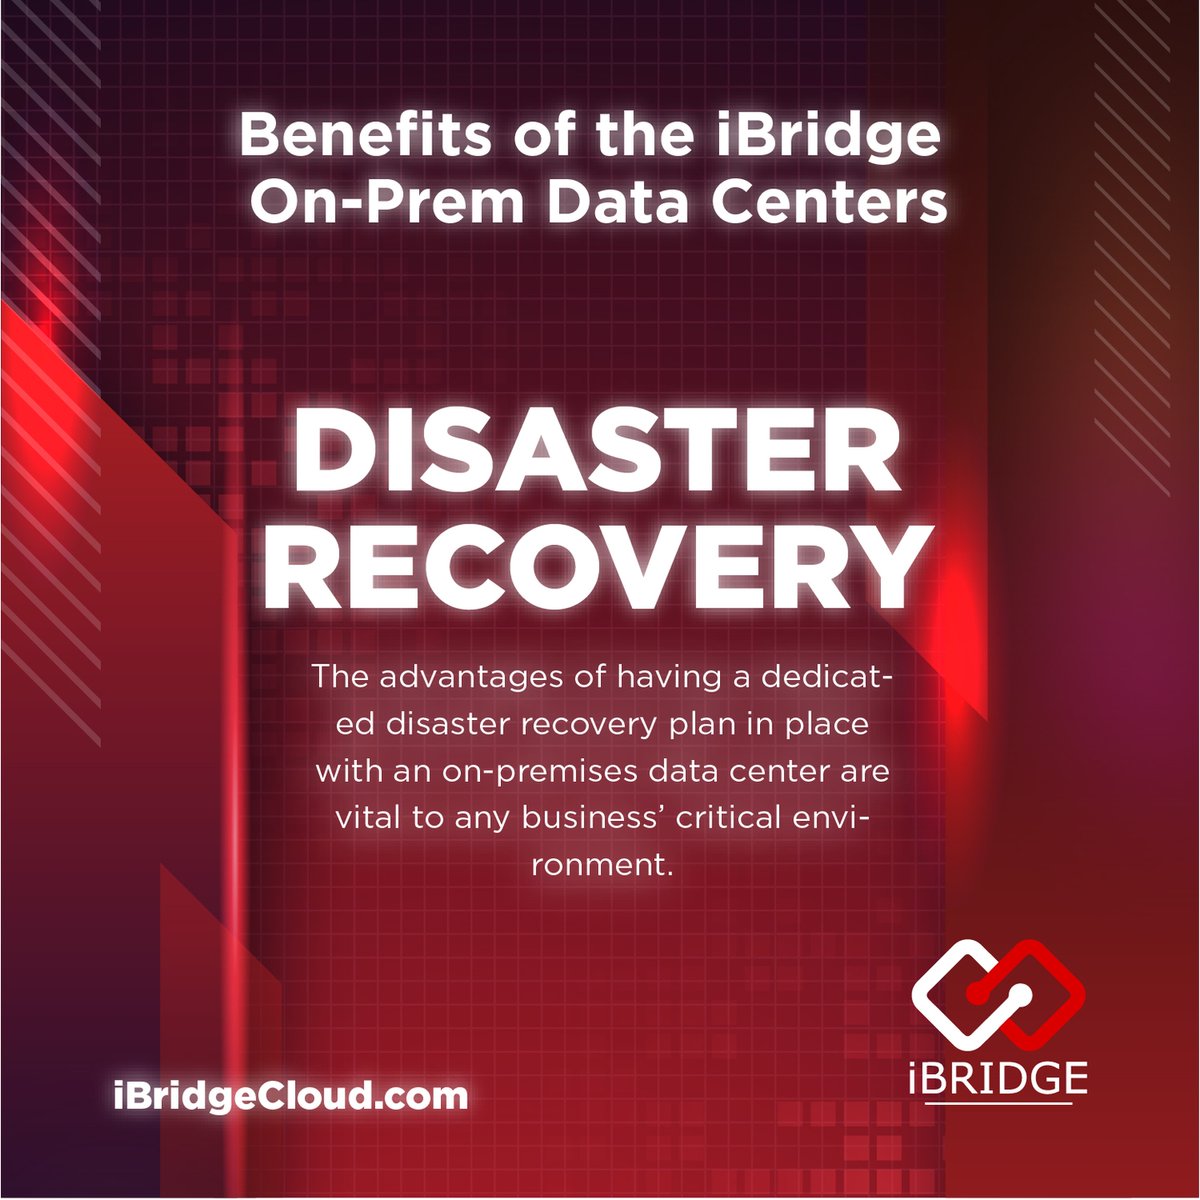 Disaster can strike anytime, but you can't let it jeopardize your data! Our disaster recovery solutions ensure that your business bounces back swiftly and securely from any unforeseen event. Contact us today and get peace of mind. iBridgeCloud.com